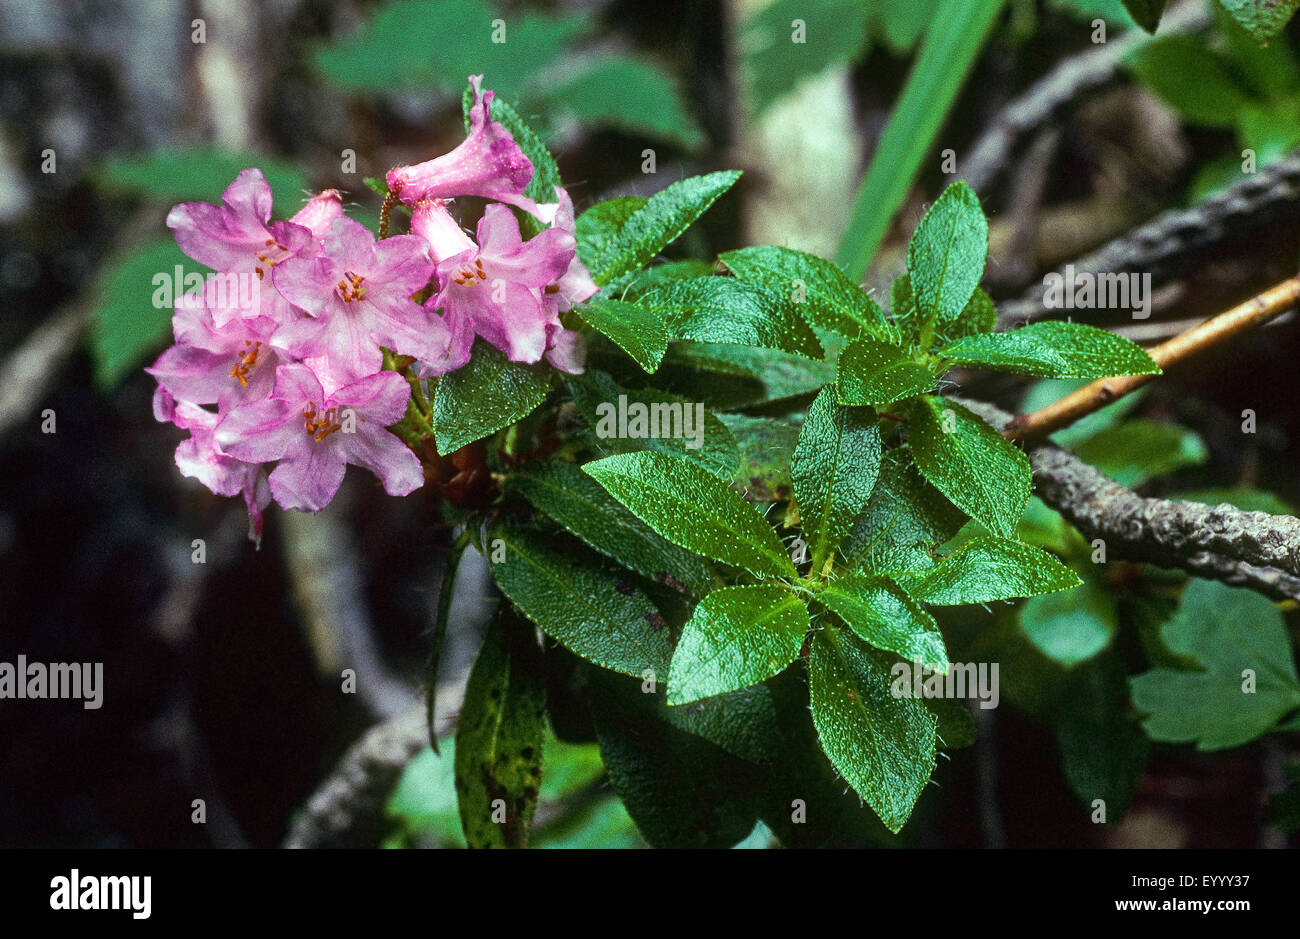 hairy alpine rose (Rhododendron hirsutum), blooming, Germany Stock Photo